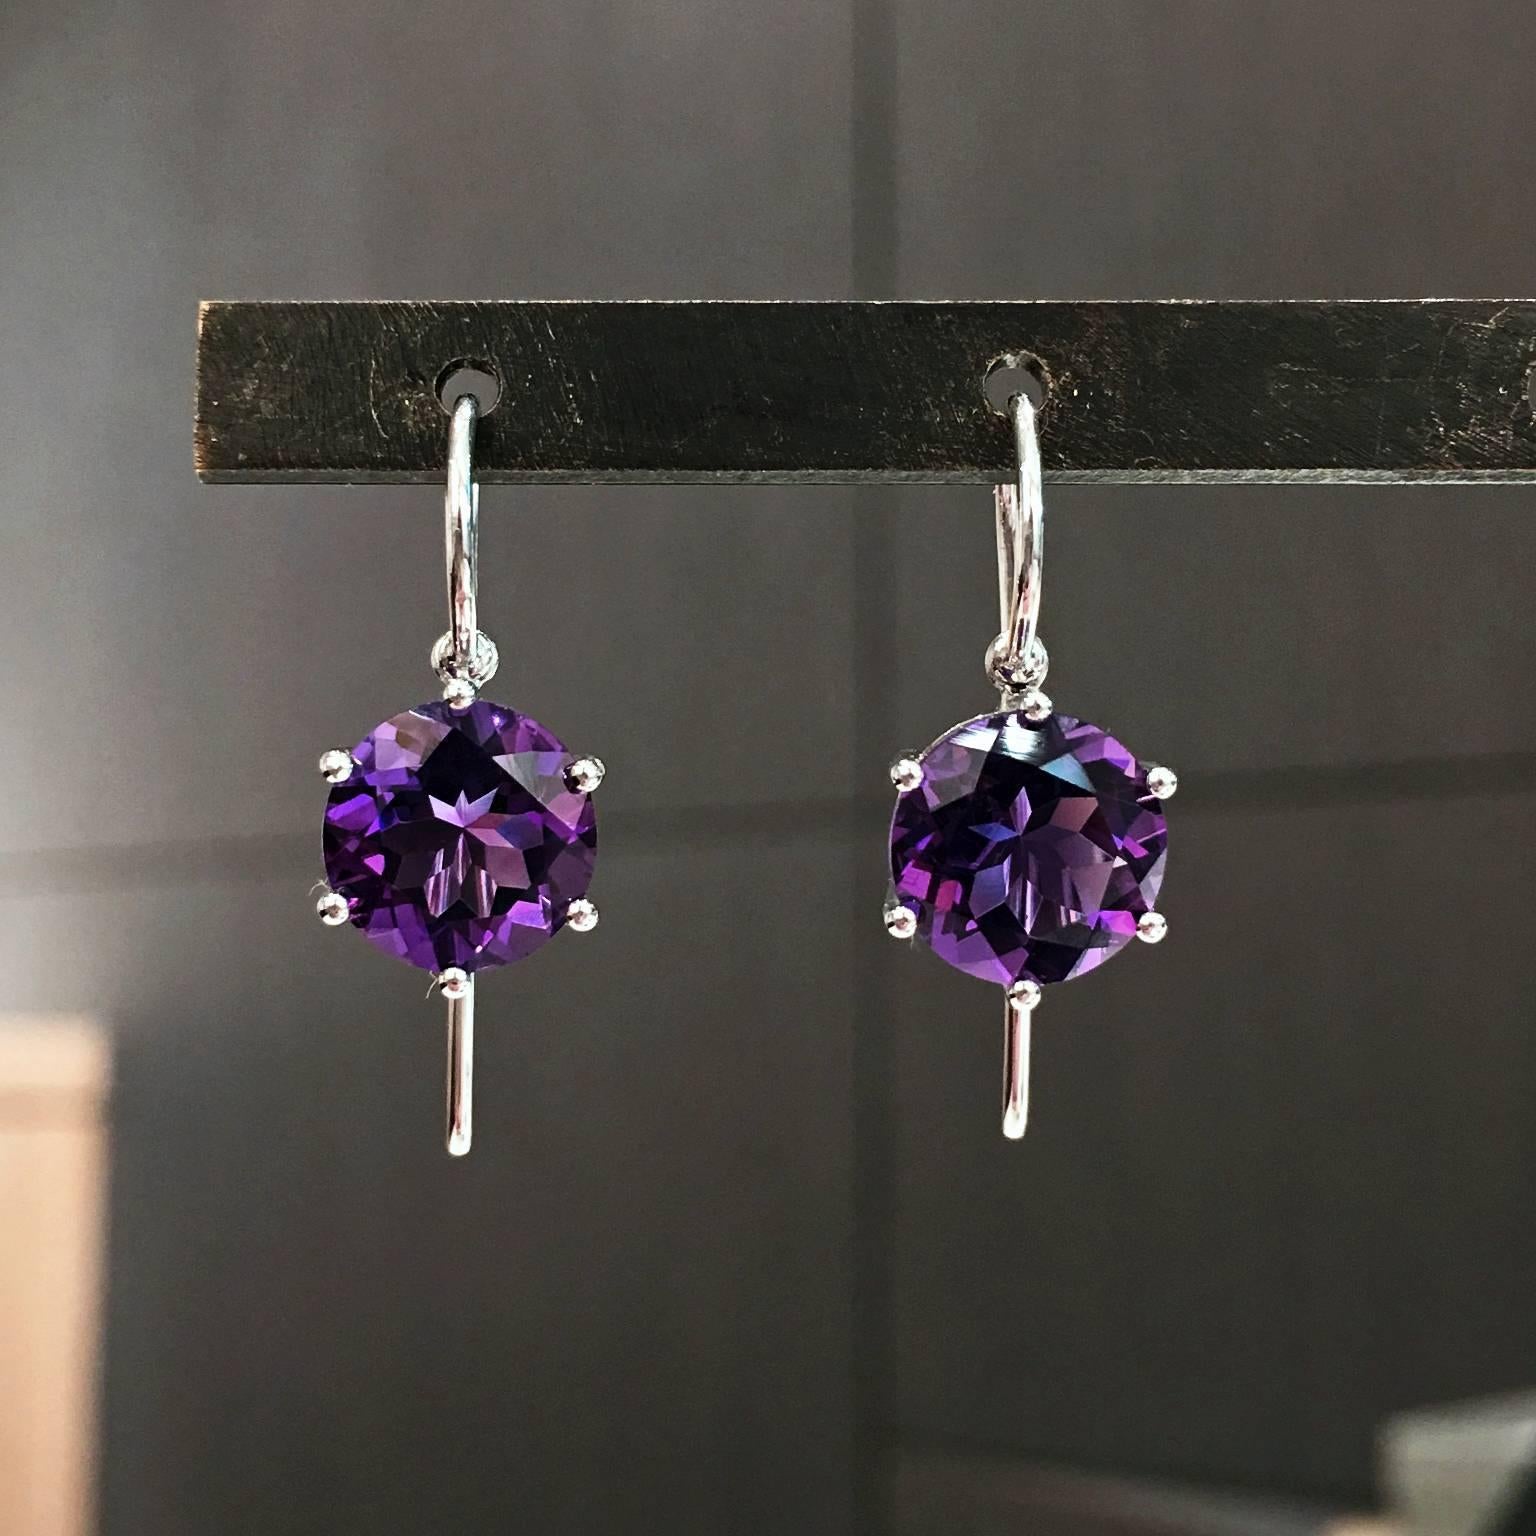 Princess Earrings, handcrafted by acclaimed German jewelry artist and master metalsmith Erich Zimmermann, in 18k white gold with a gorgeous, fiery matched pair of 9mm violet amethyst totaling 6.80 carats set with six ball prongs in an open basket